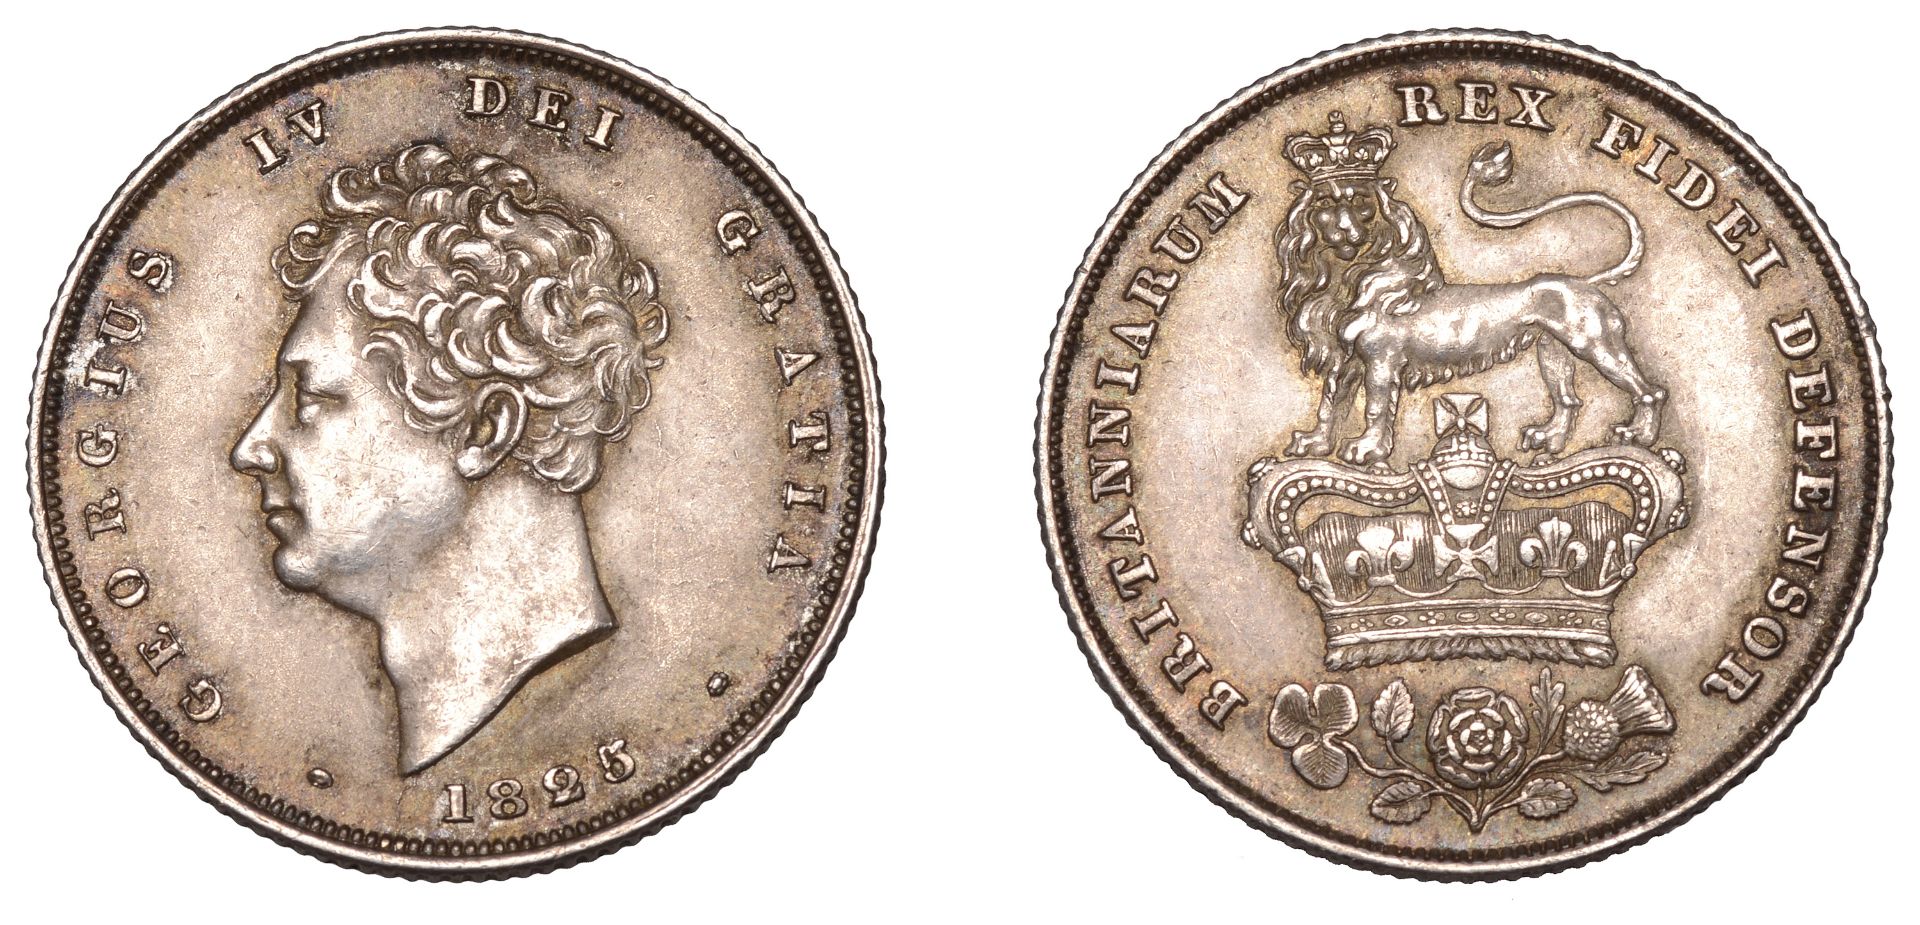 George IV (1820-1830), Shilling, 1825, type 3 (ESC 2405; S 3812). Nearly extremely fine Â£10...